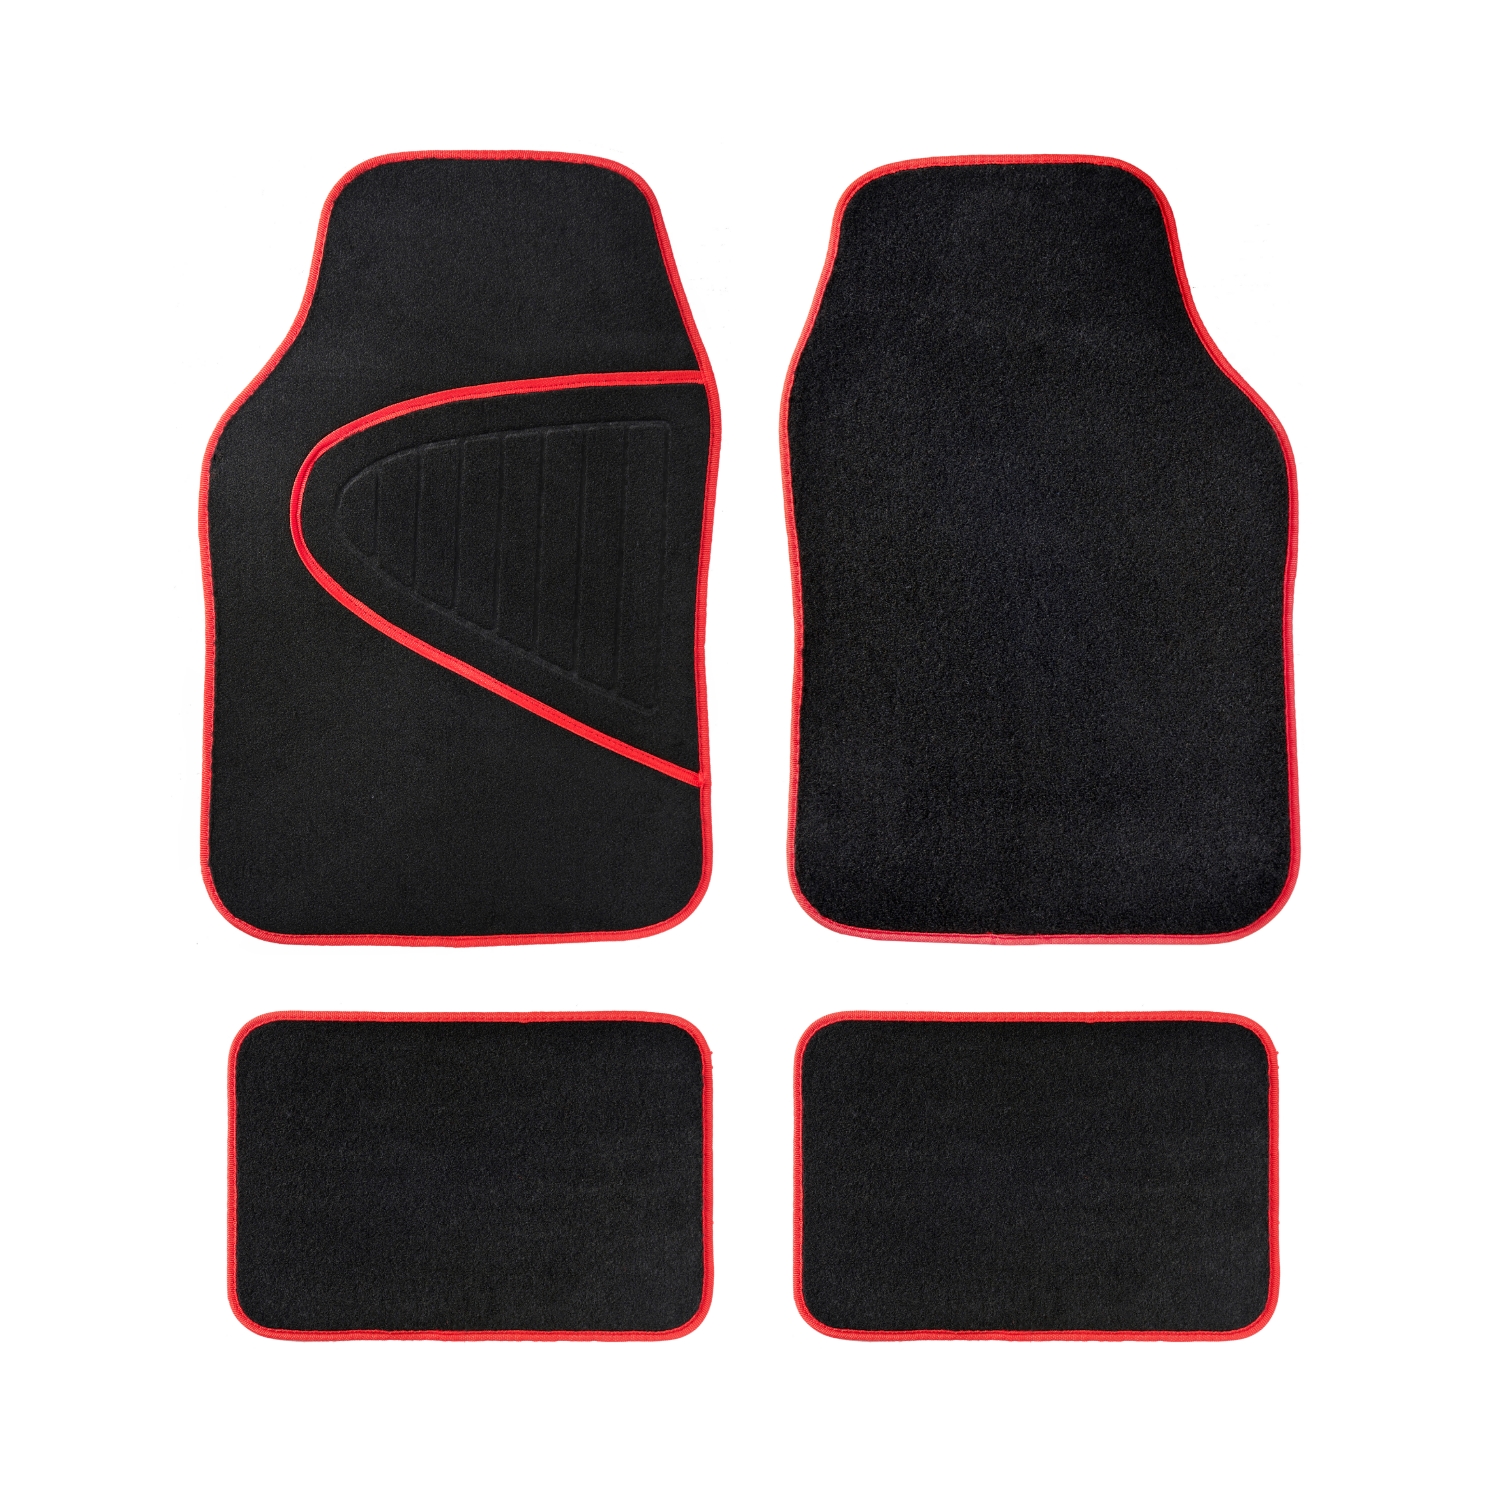 Best Floor Mats for Cars: The Complete Guide